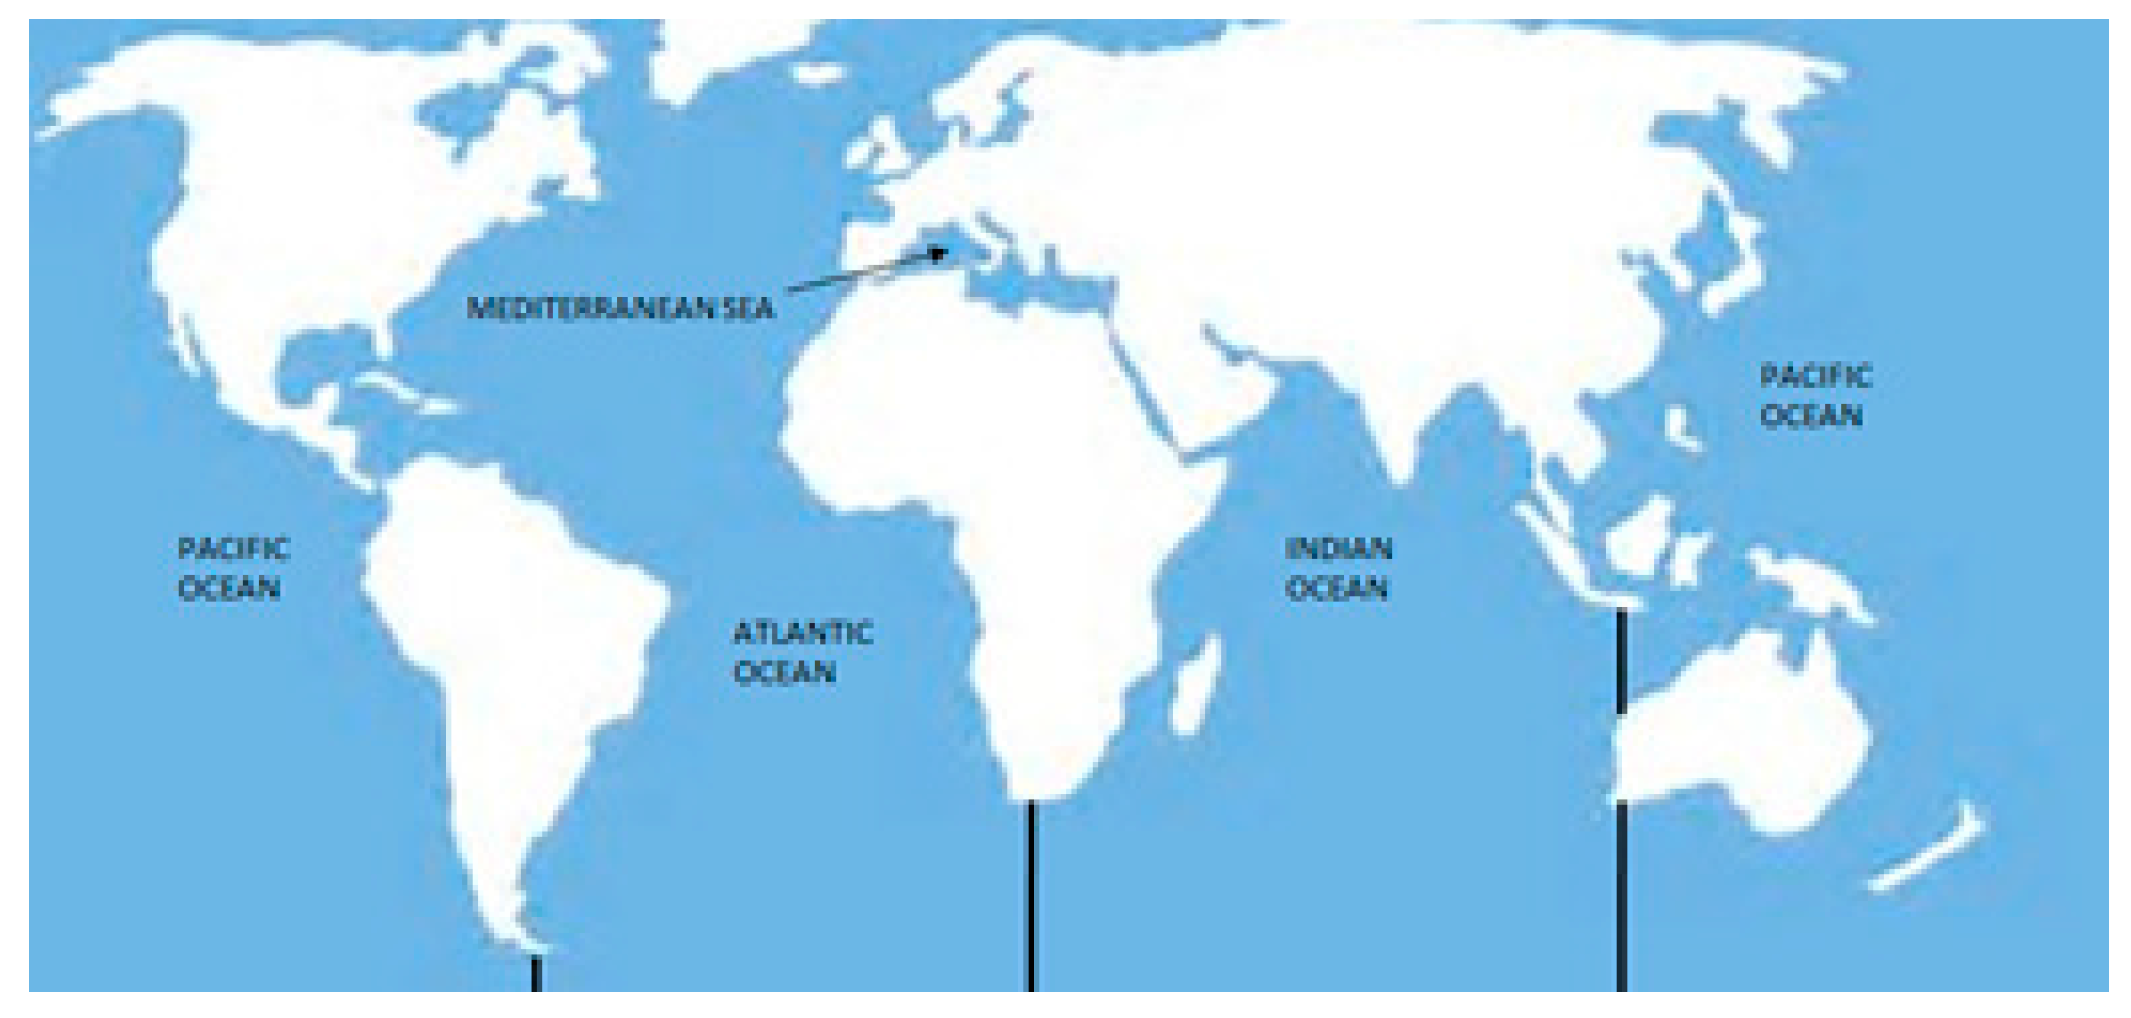 How many countries have coastlines on both the atlantic and pacific